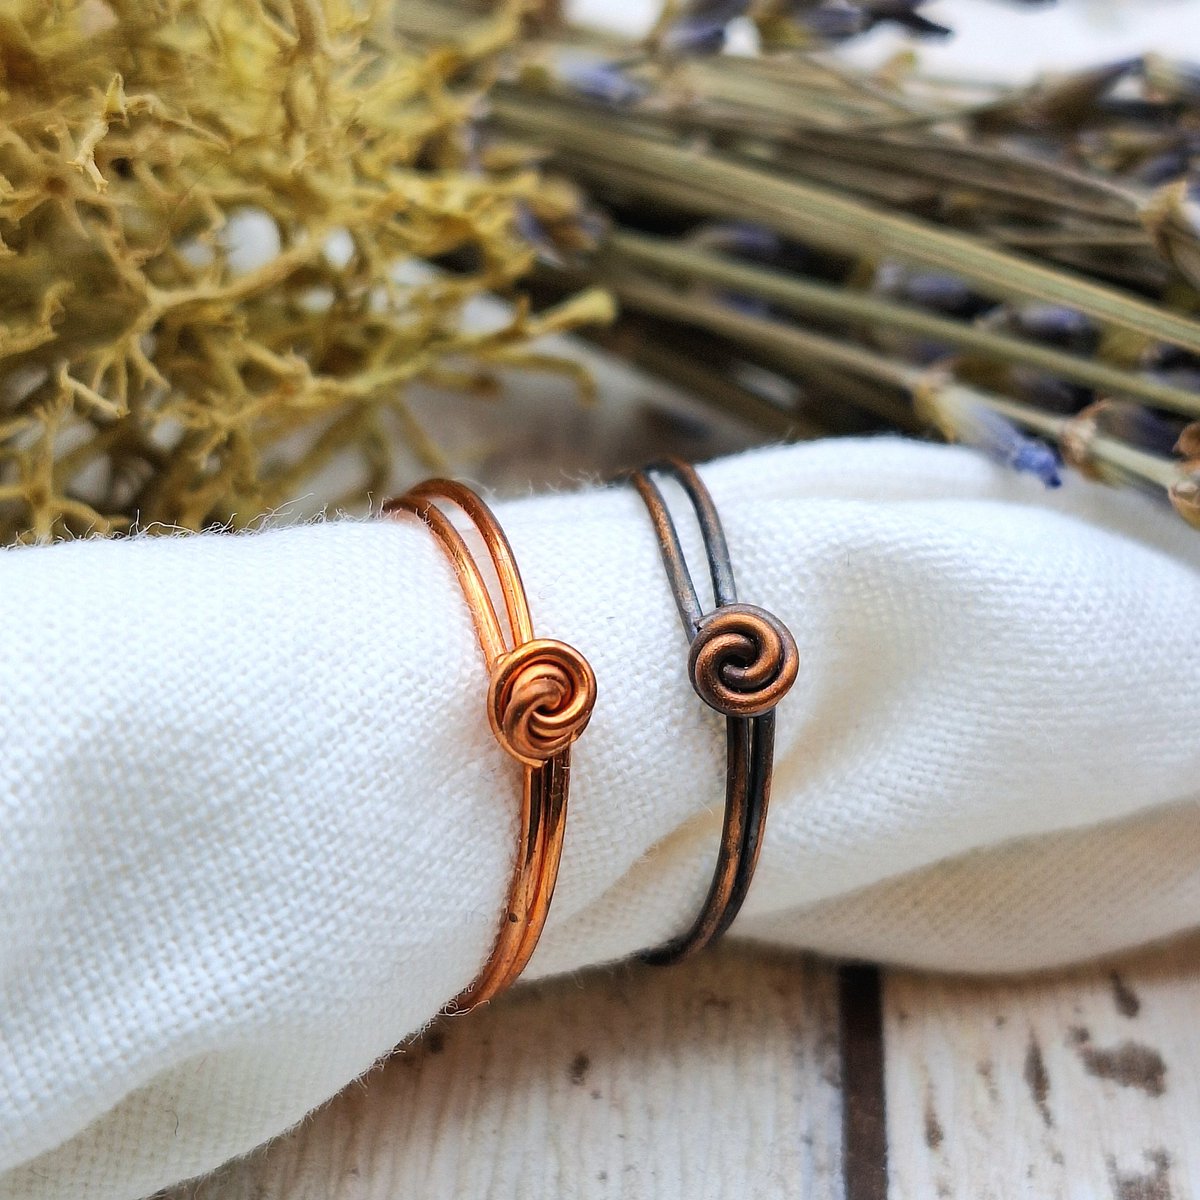 My simple copper rose twist stacking rings. Left is pure copper, right version has been oxidised and polished.

#copperjewelry #wirewrappedjewelry #gemstonejewelry #jewelleryartist #ringsandthings #rings #stackingrings #copperrings #rose #rosedesign #thetwistedkitty #witch